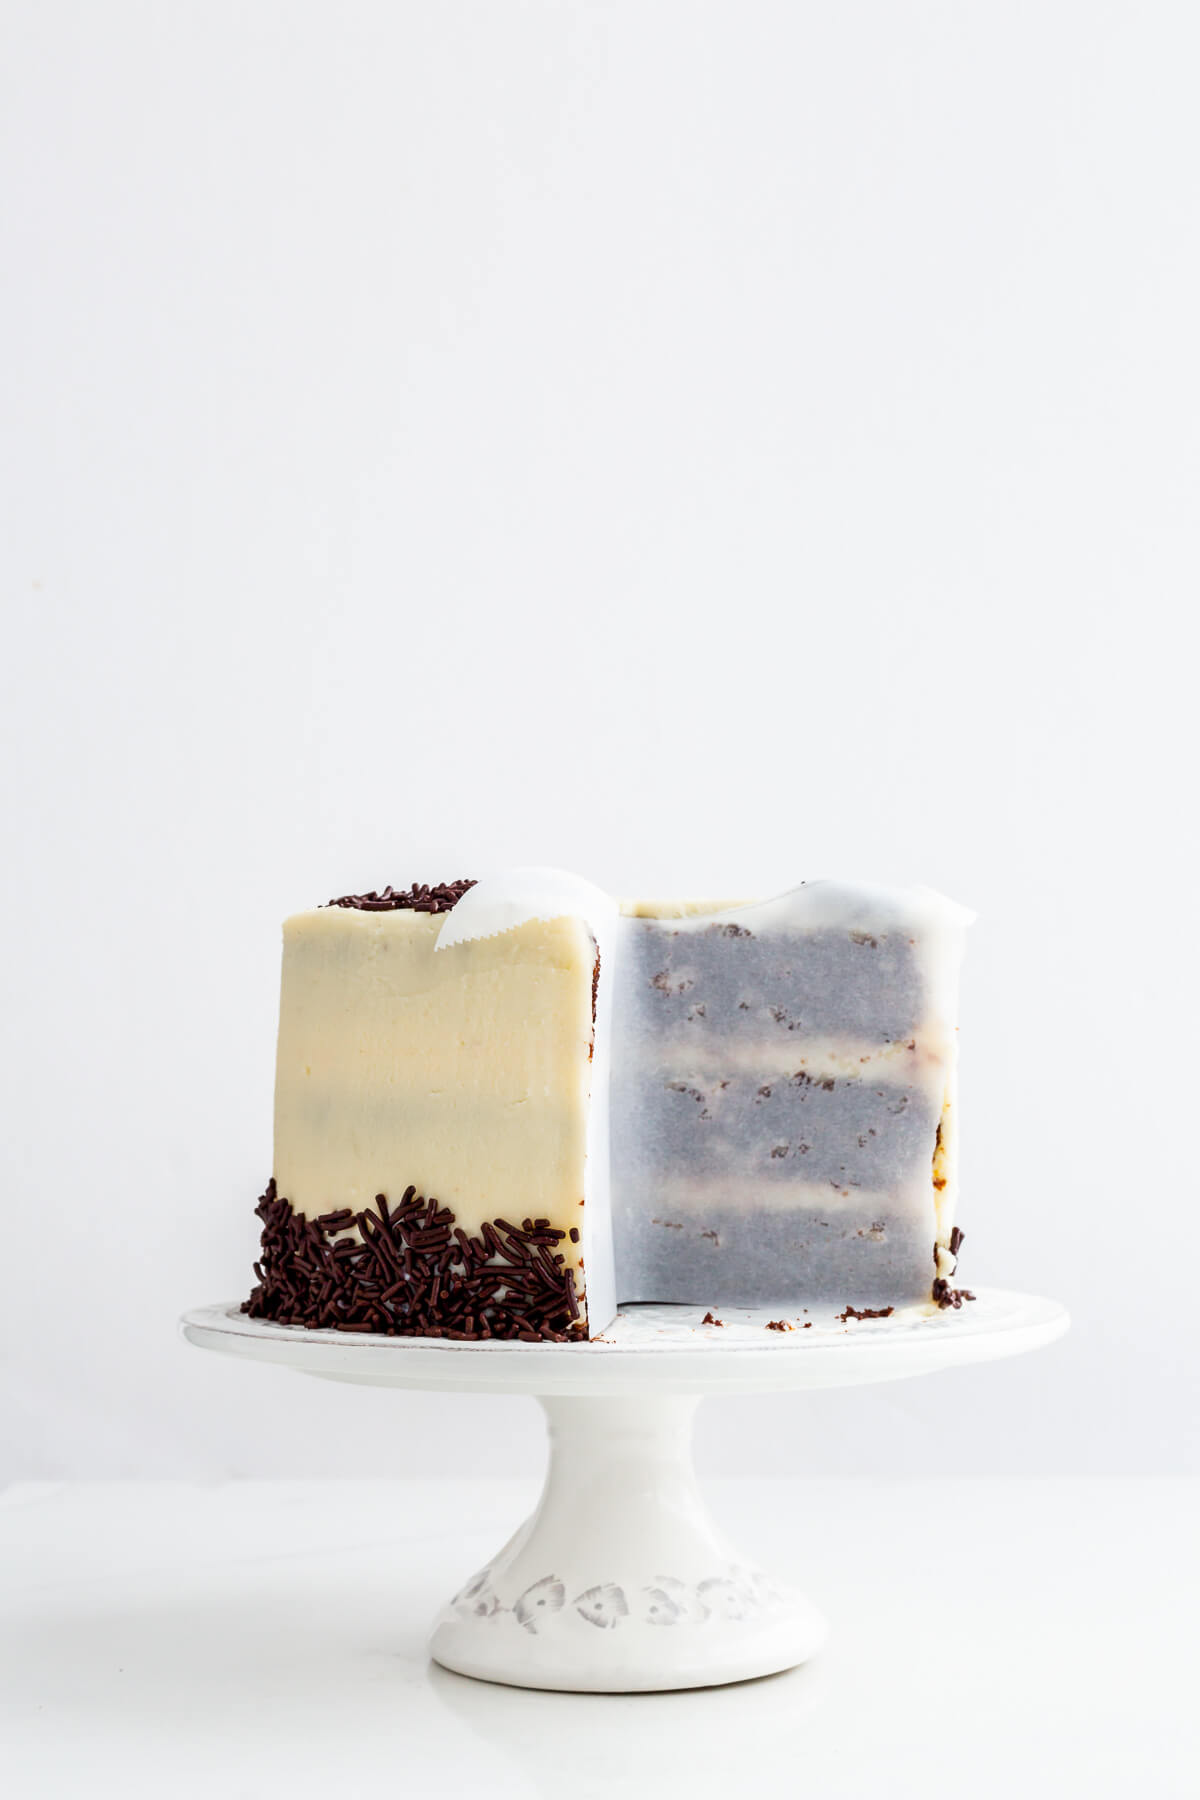 Layer cake on a cake stand with parchment paper to protect the cut edges to prevent drying.